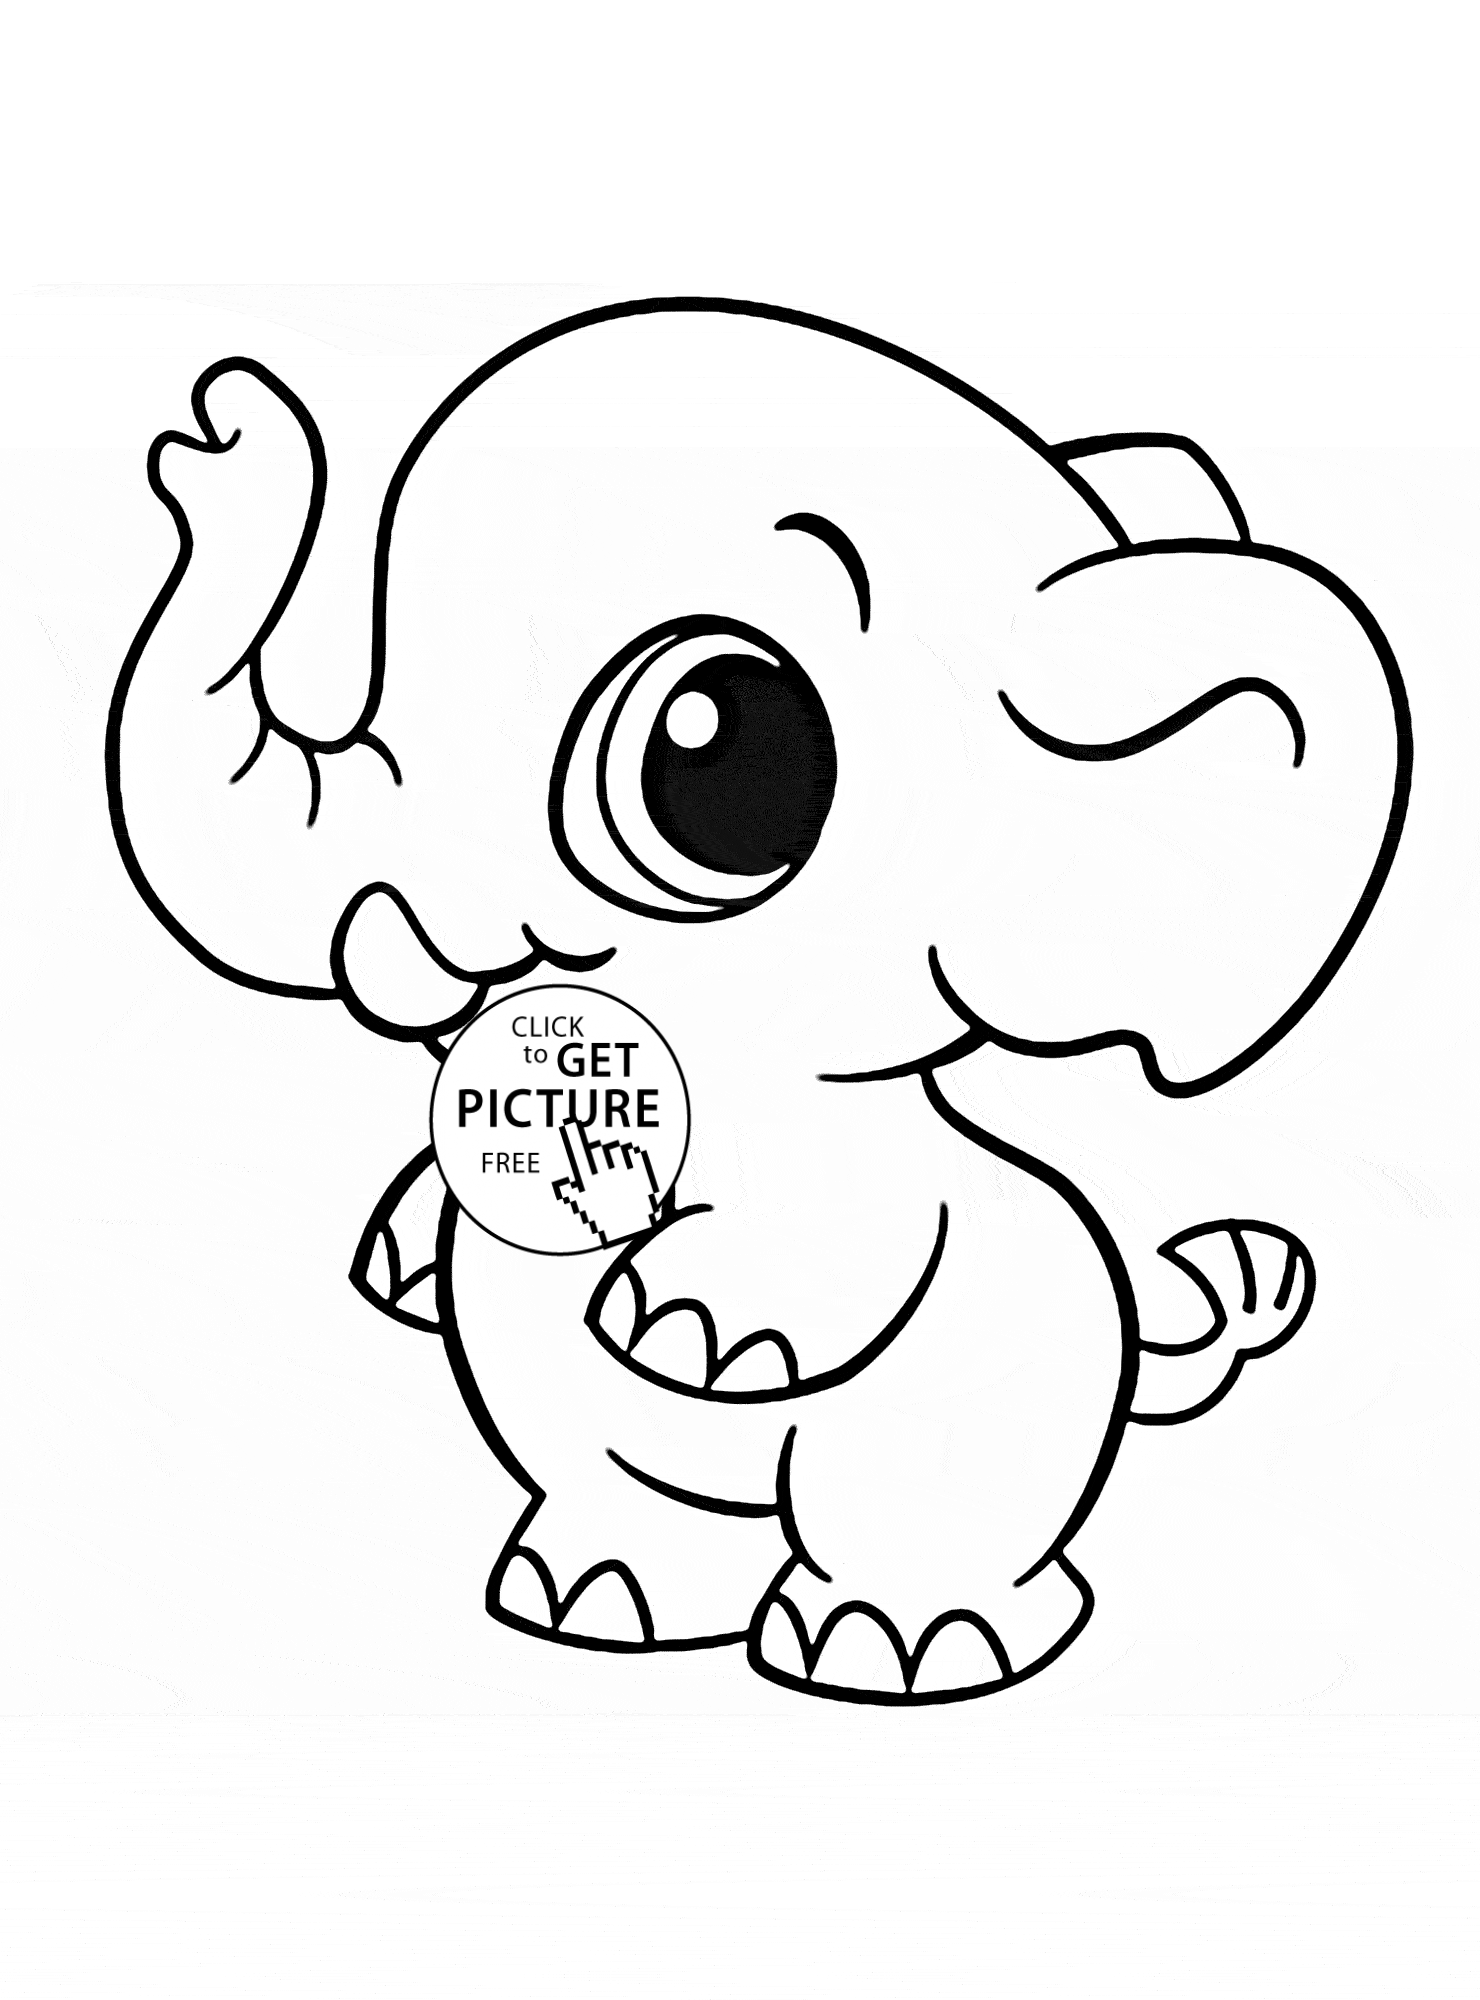 Little Elephant coloring page for kids, animal coloring pages ...